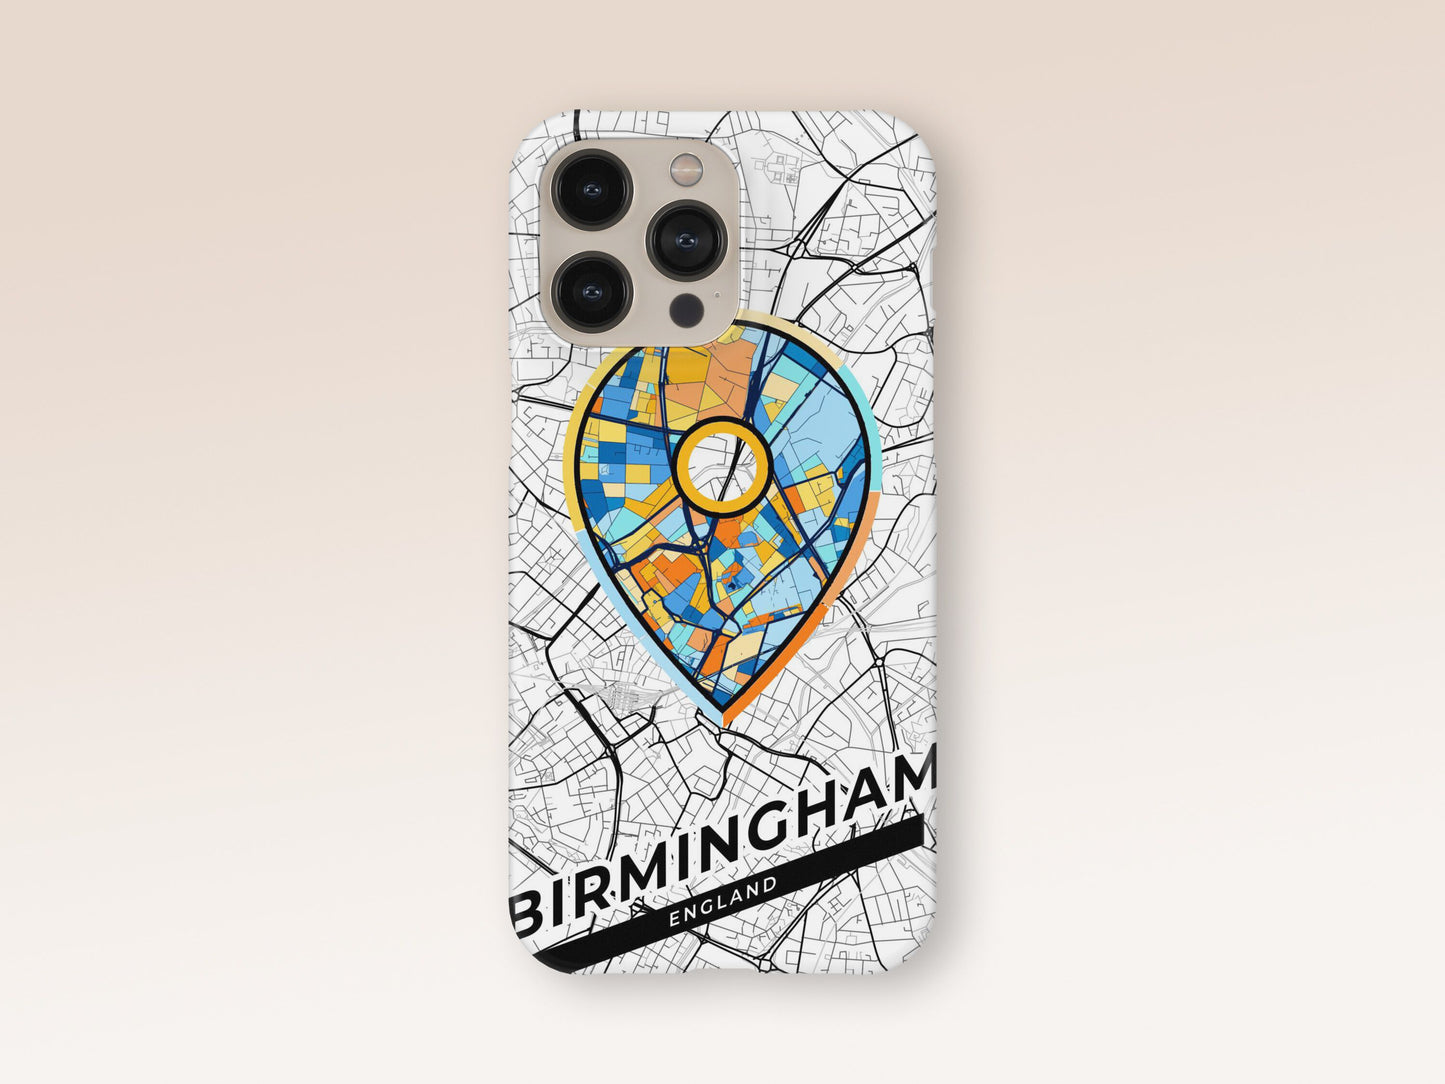 Birmingham England slim phone case with colorful icon. Birthday, wedding or housewarming gift. Couple match cases. 1